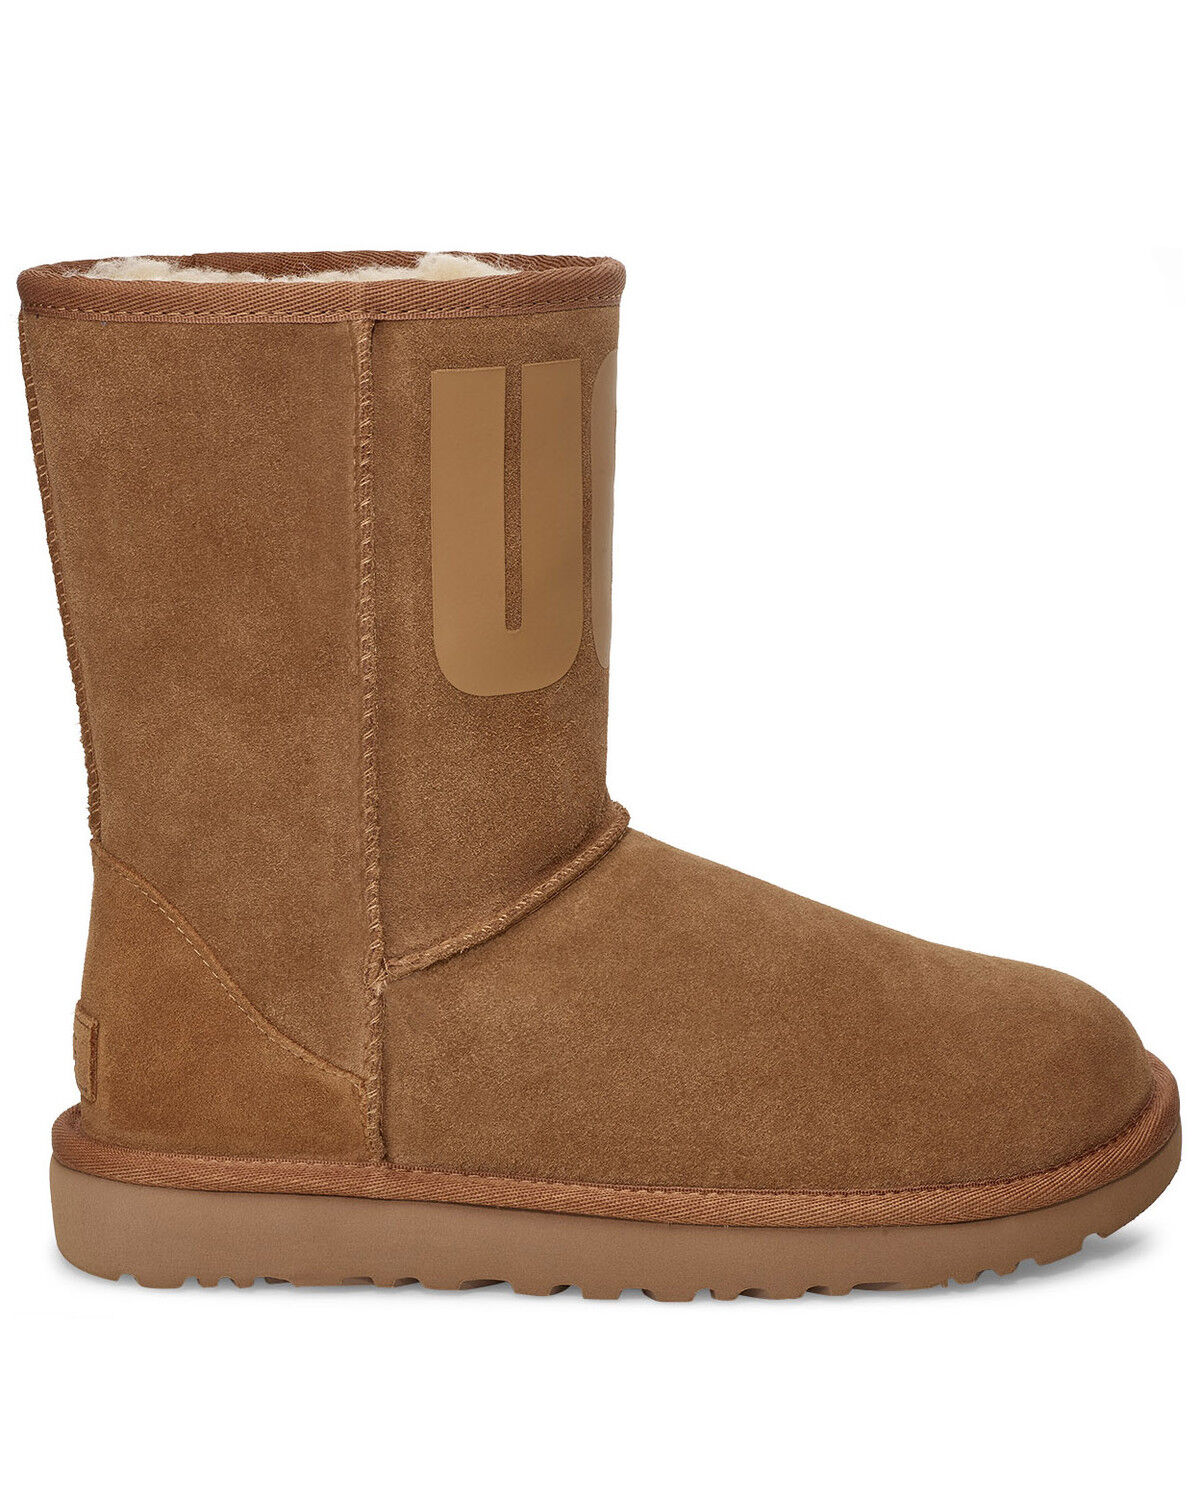 uggs womens classic short boots on sale